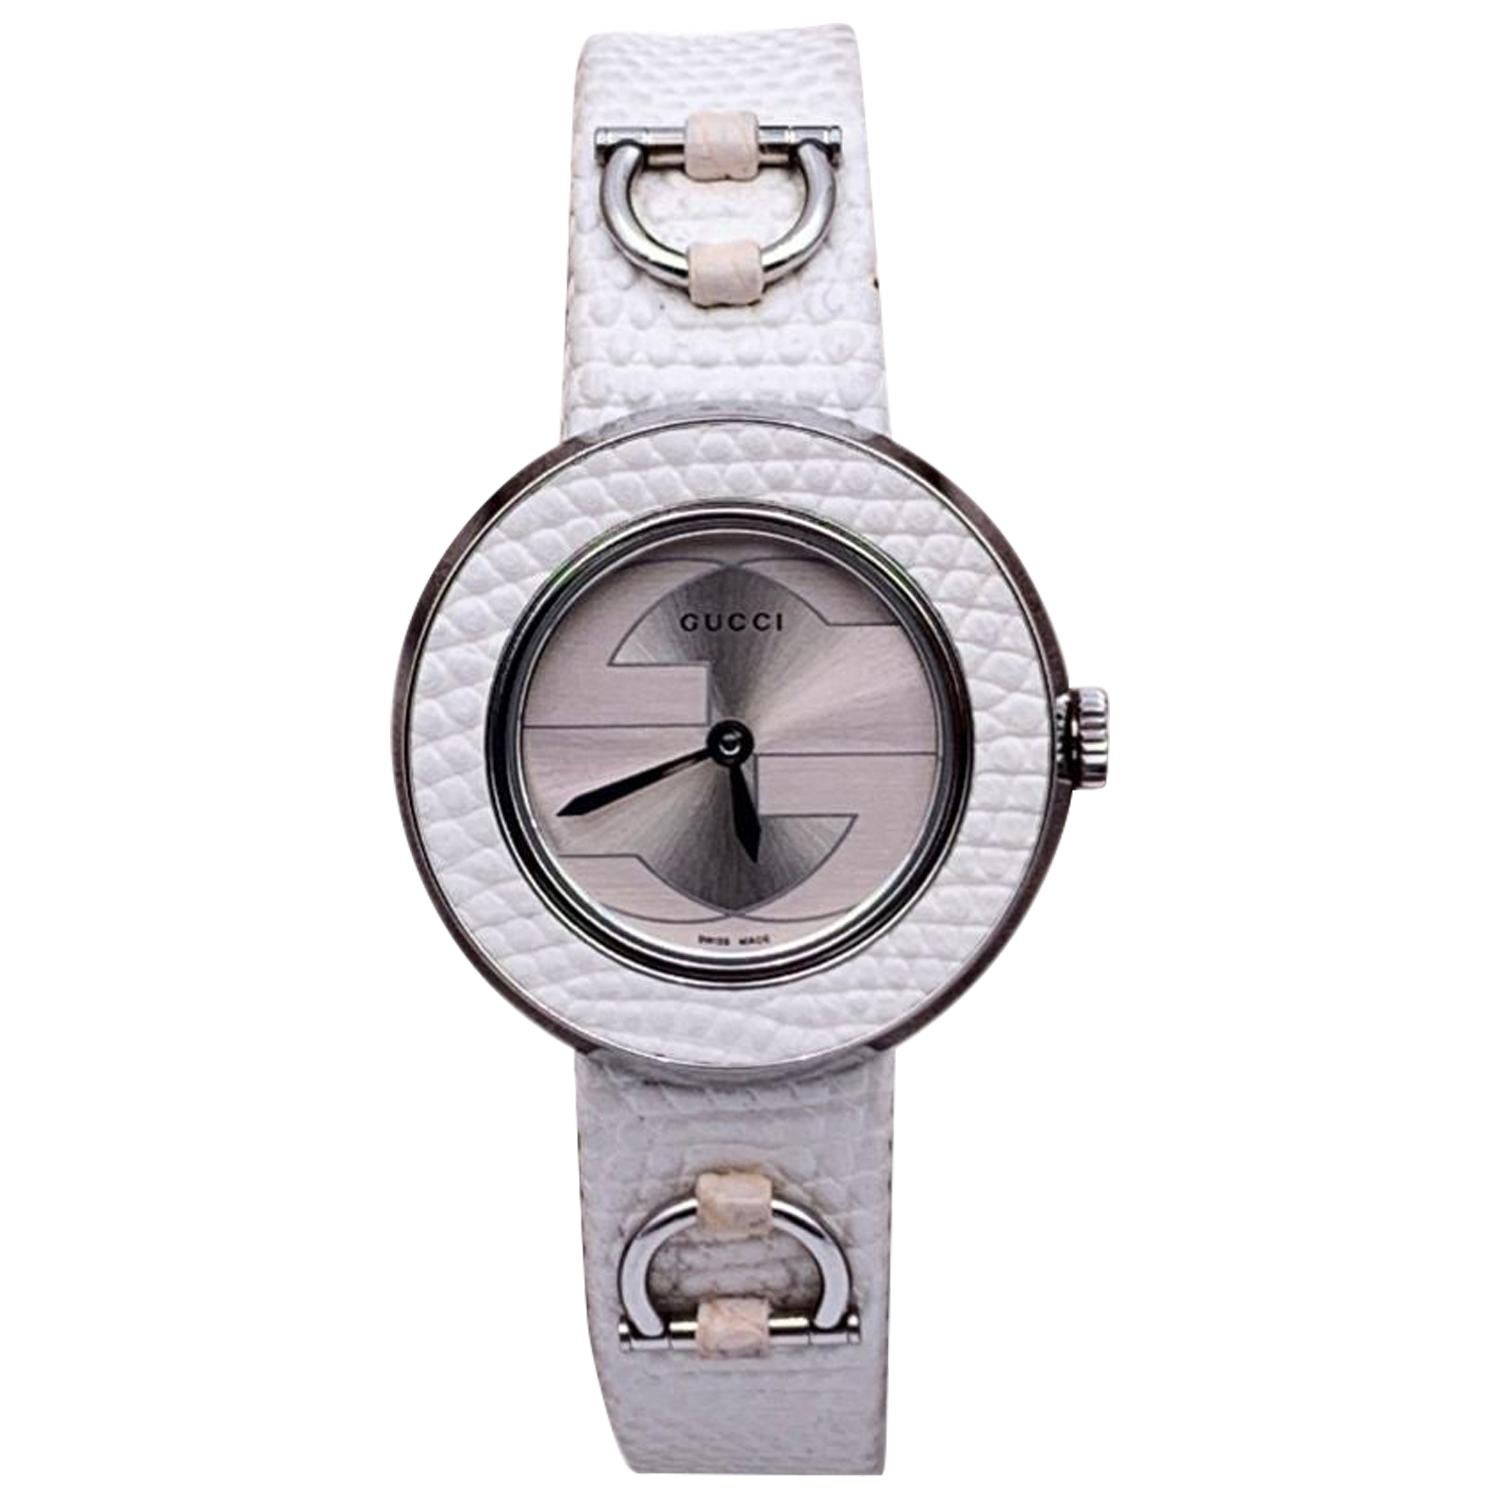 Gucci White Leather Stainless Steel 129.5 Quartz Wrist Watch